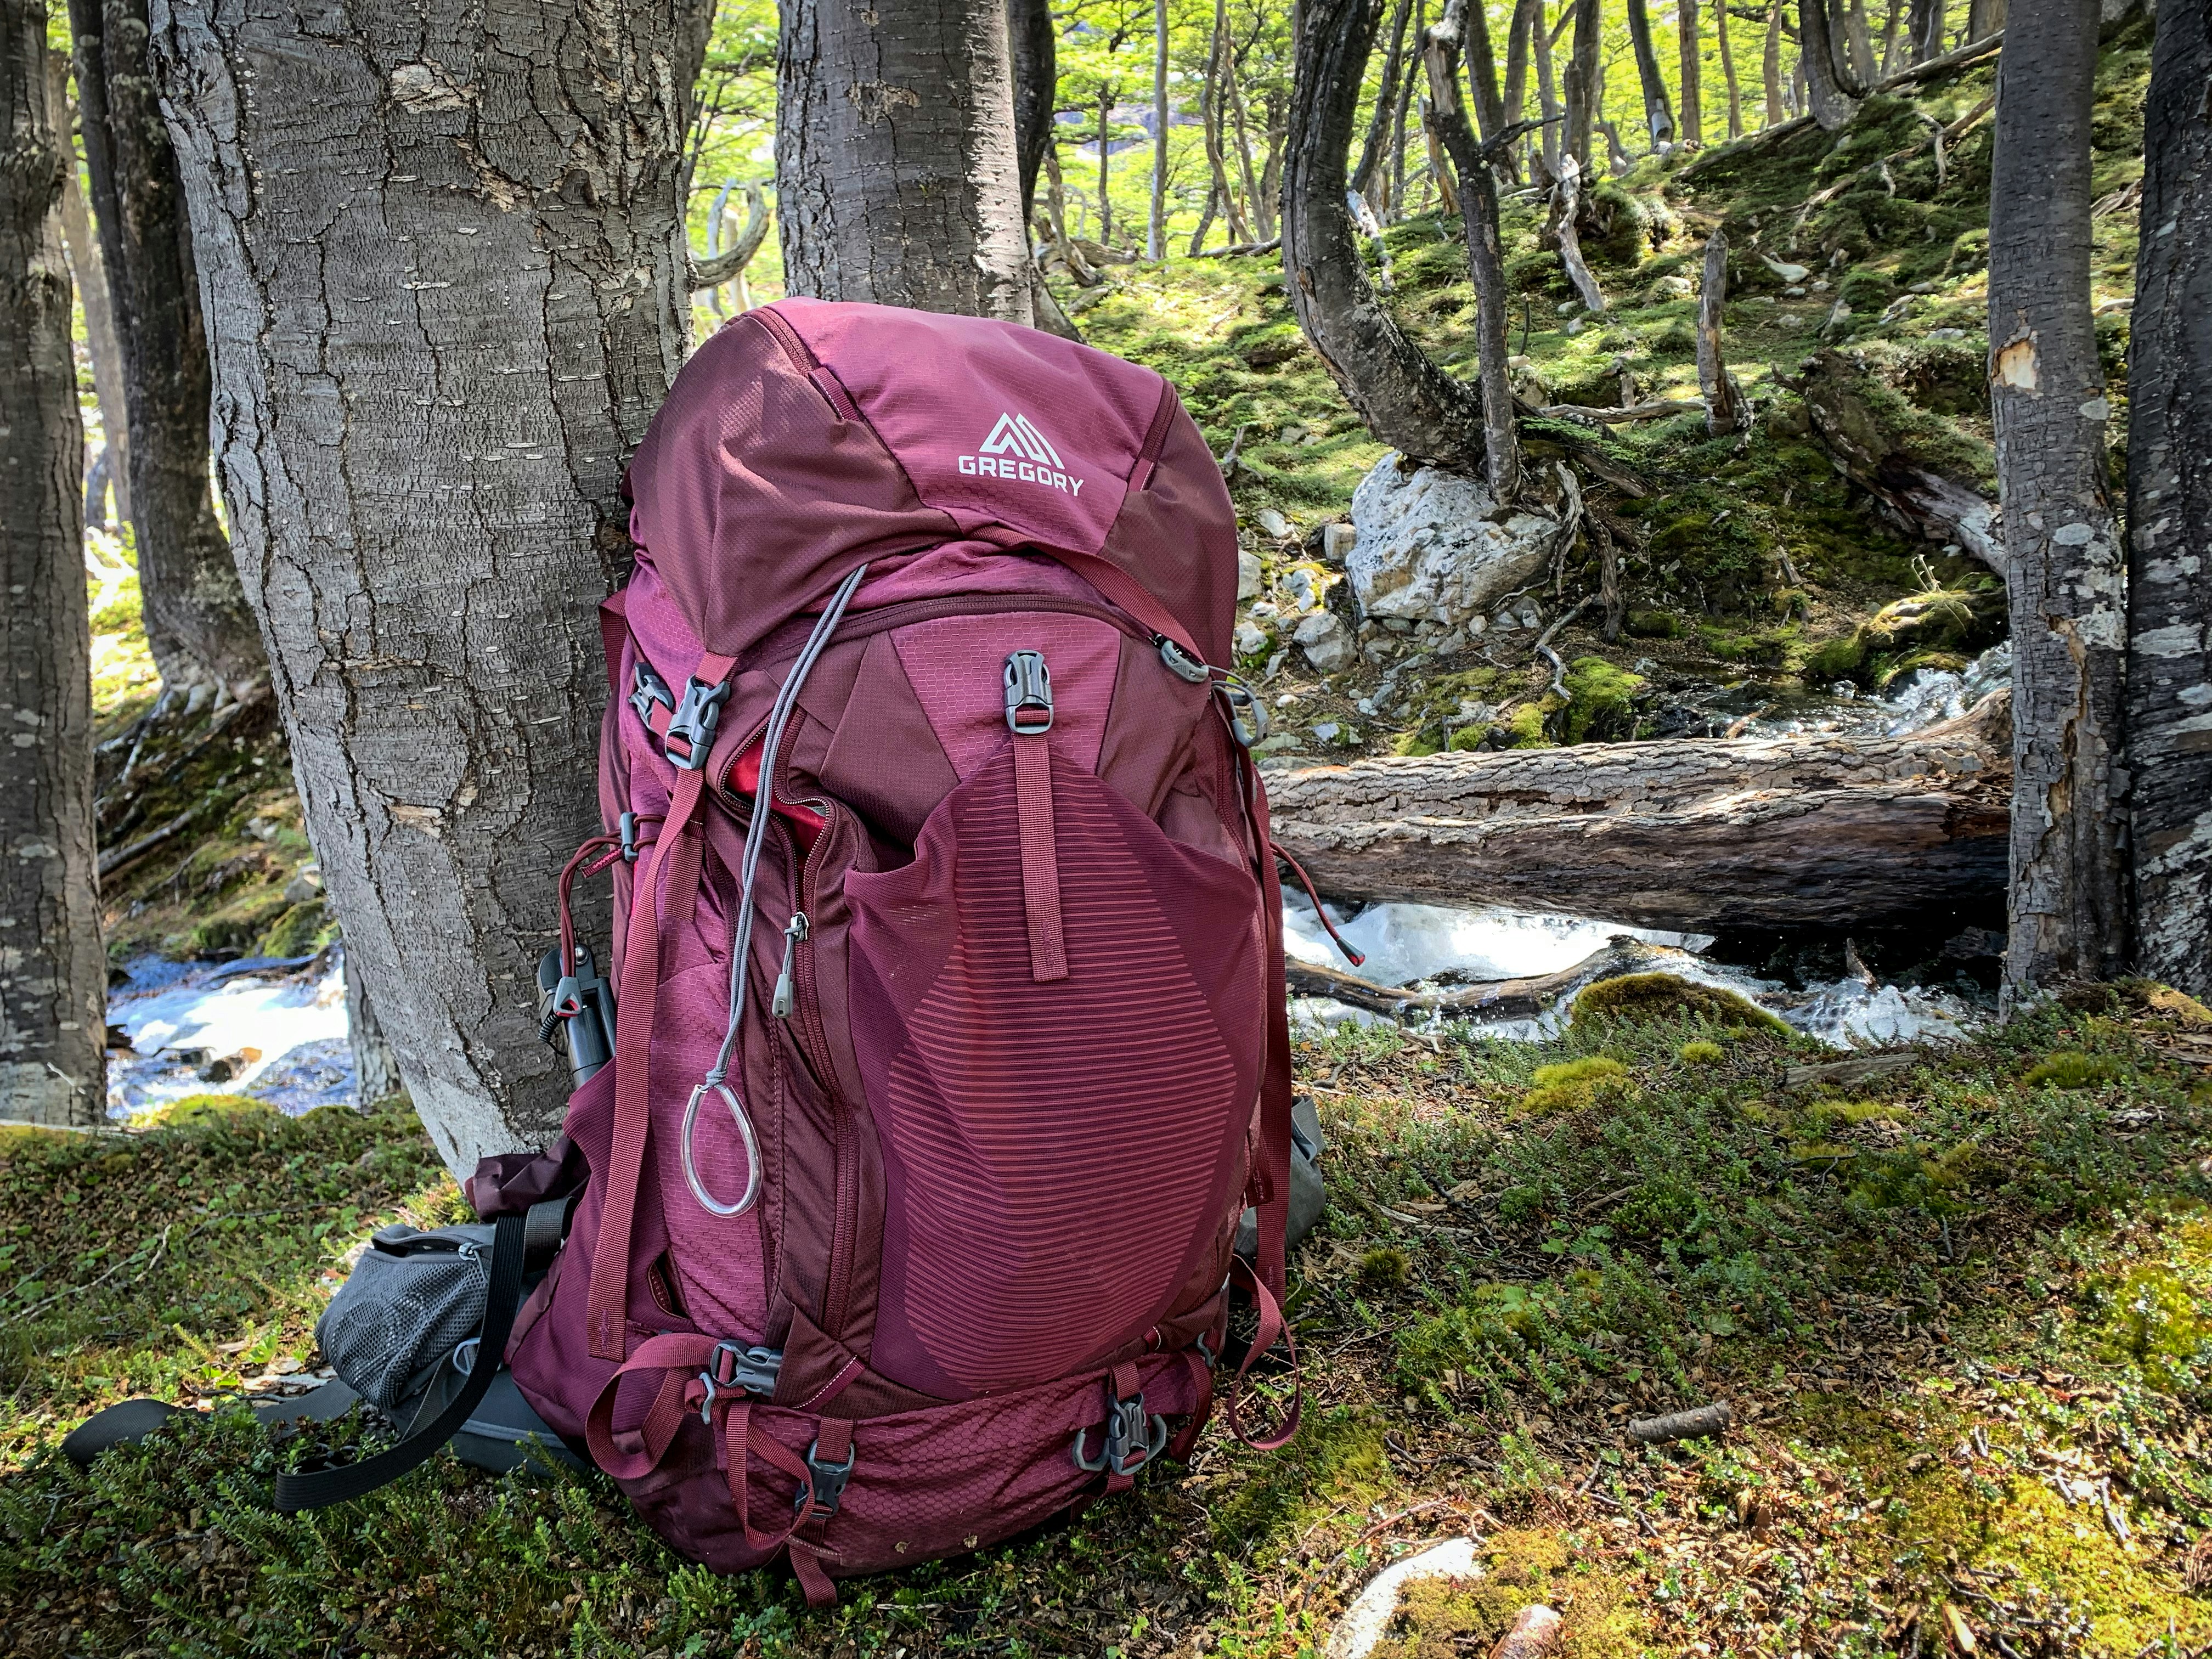 A purple backpack leaning against a tree in a forest